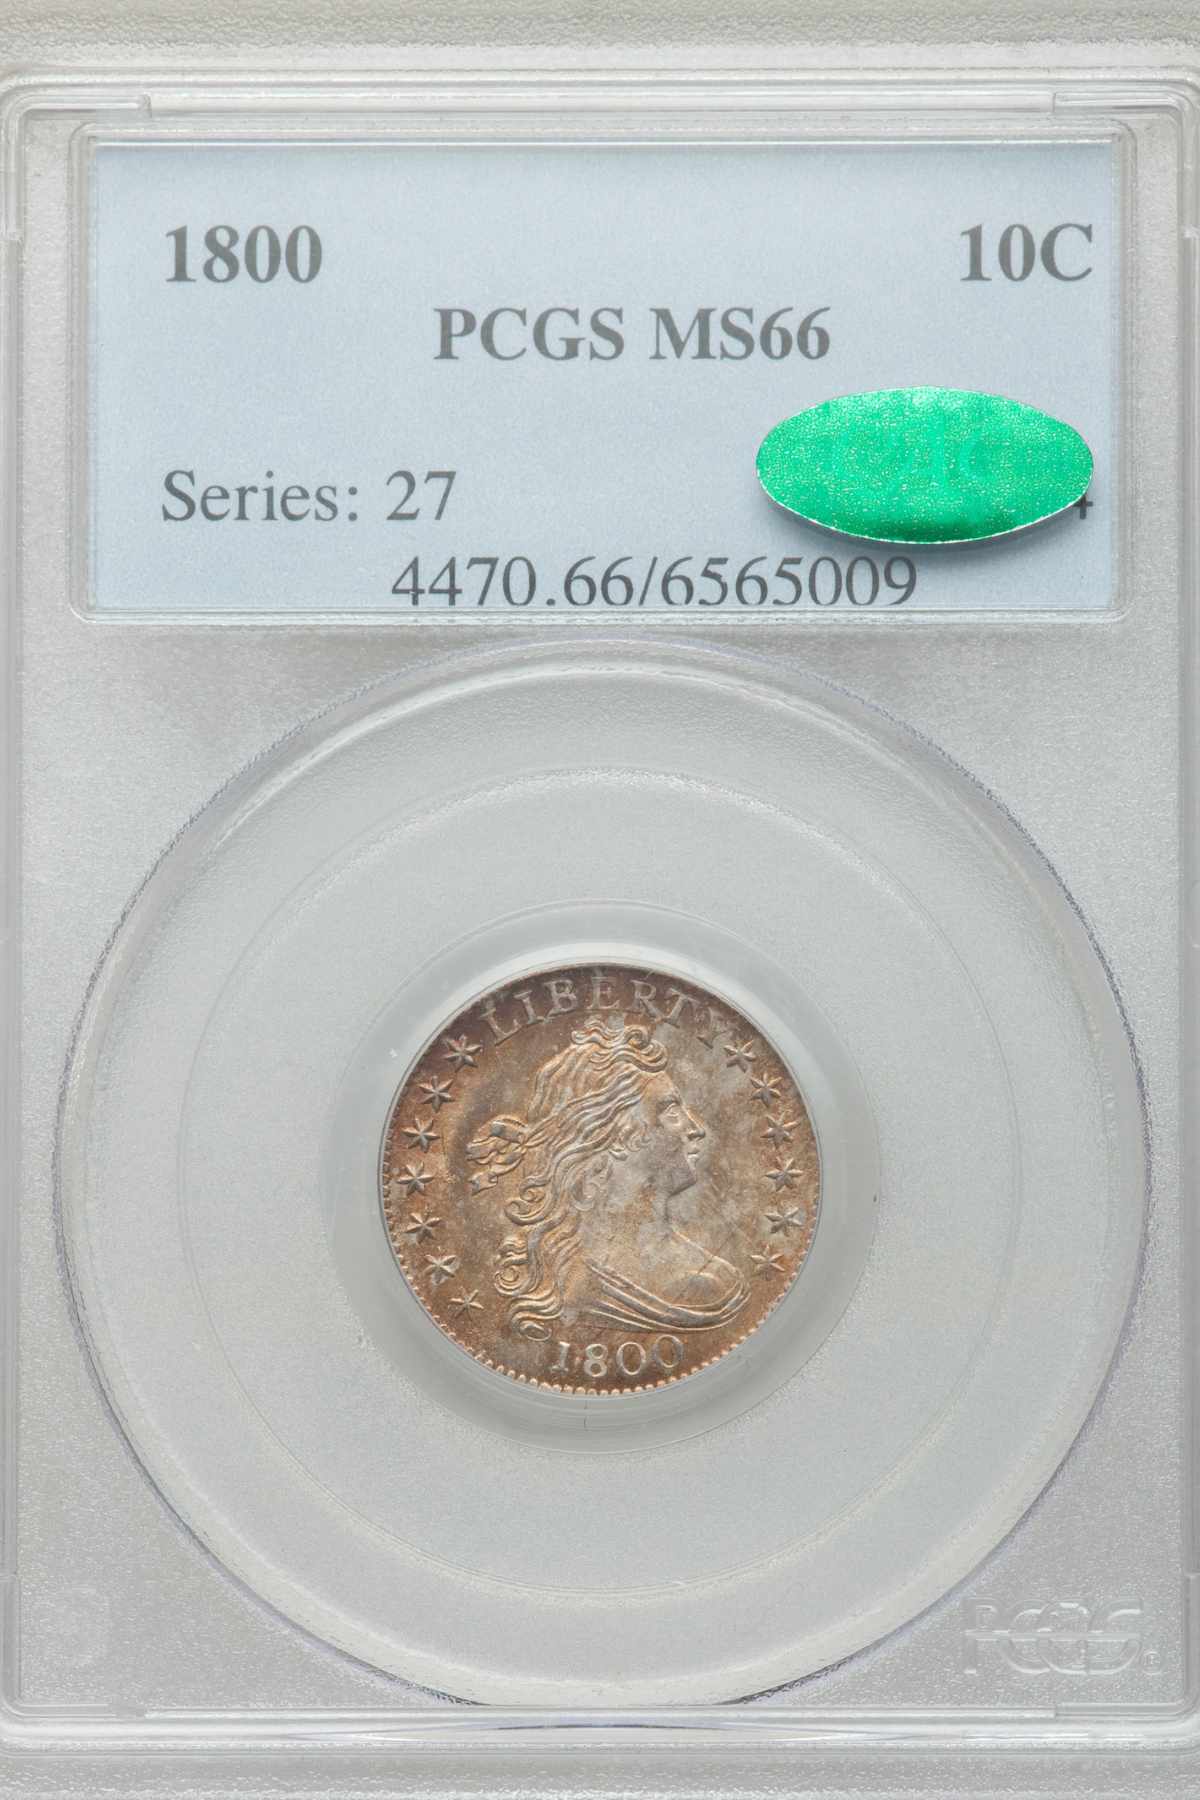 1800 Draped Bust Dime sold for $352,500